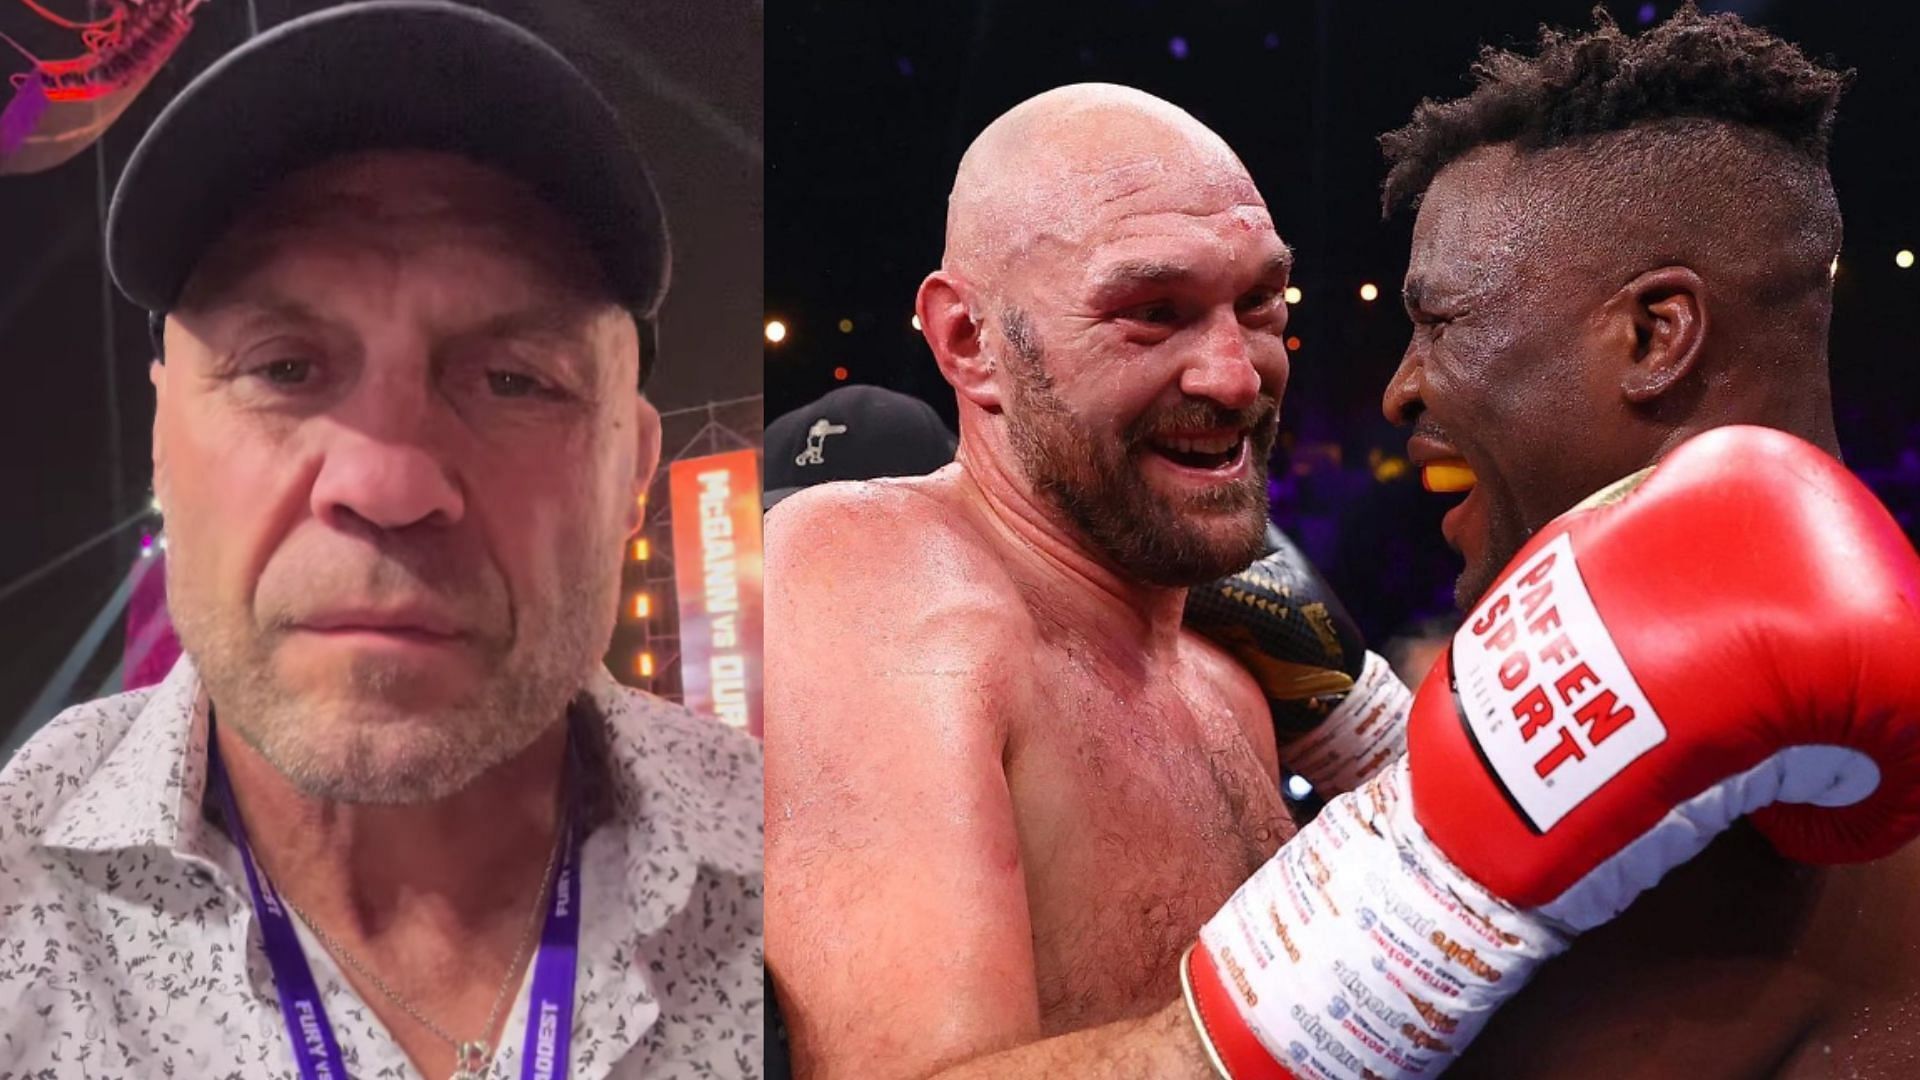 Randy Couture (left), Tyson Fury &amp; Francis Ngannou (right) [Images courtesy of @xcnatch on Instagram]